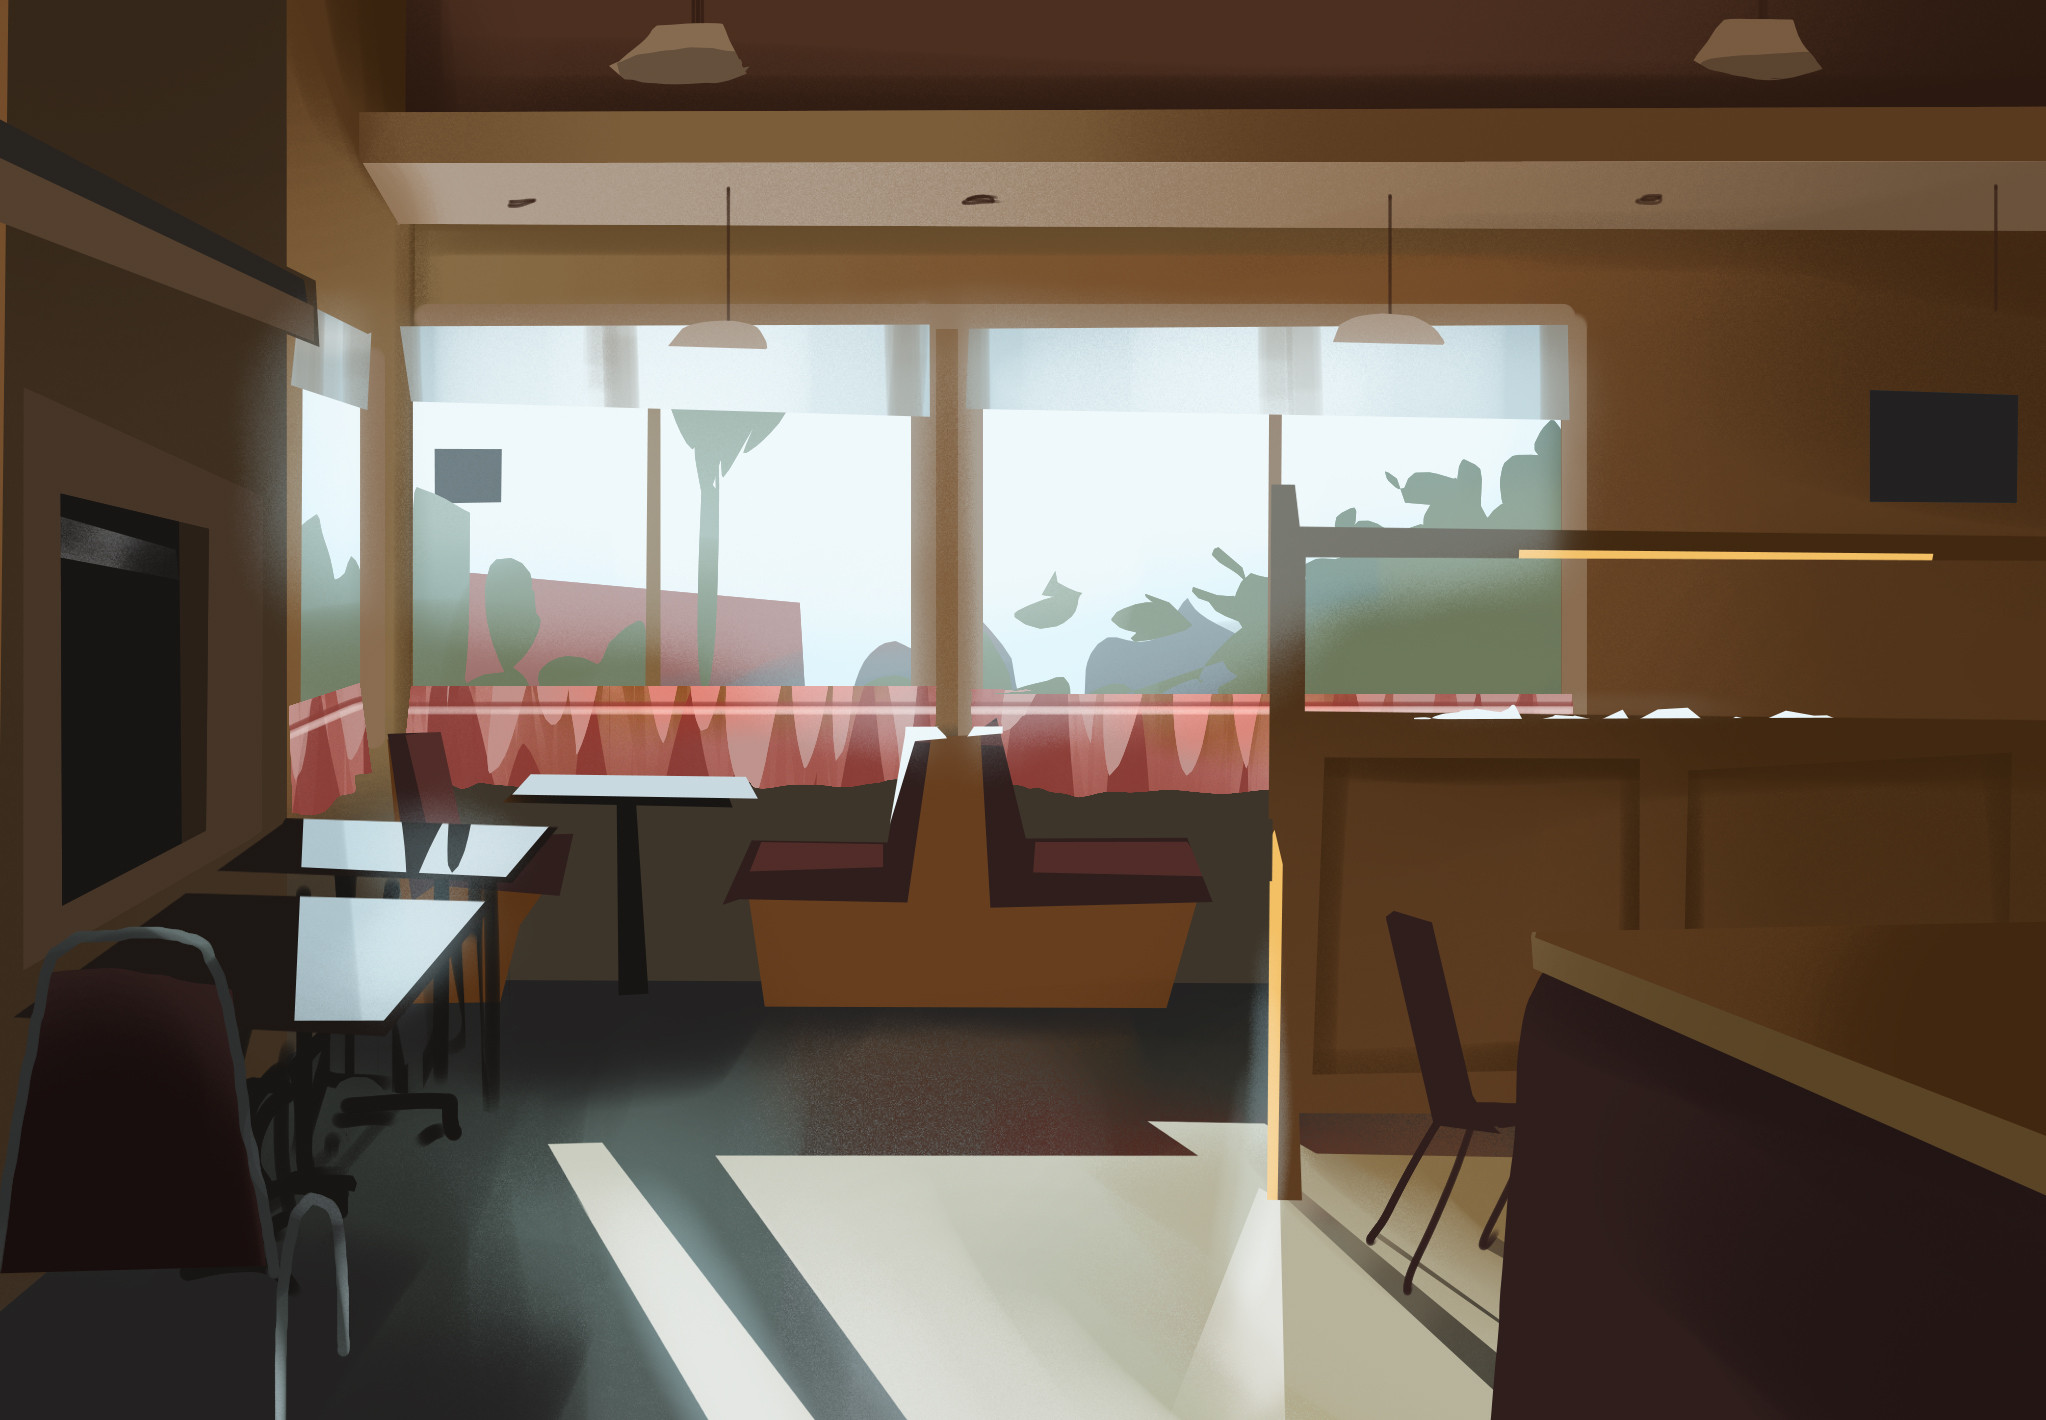 Study of a Morning Diner - from a photo